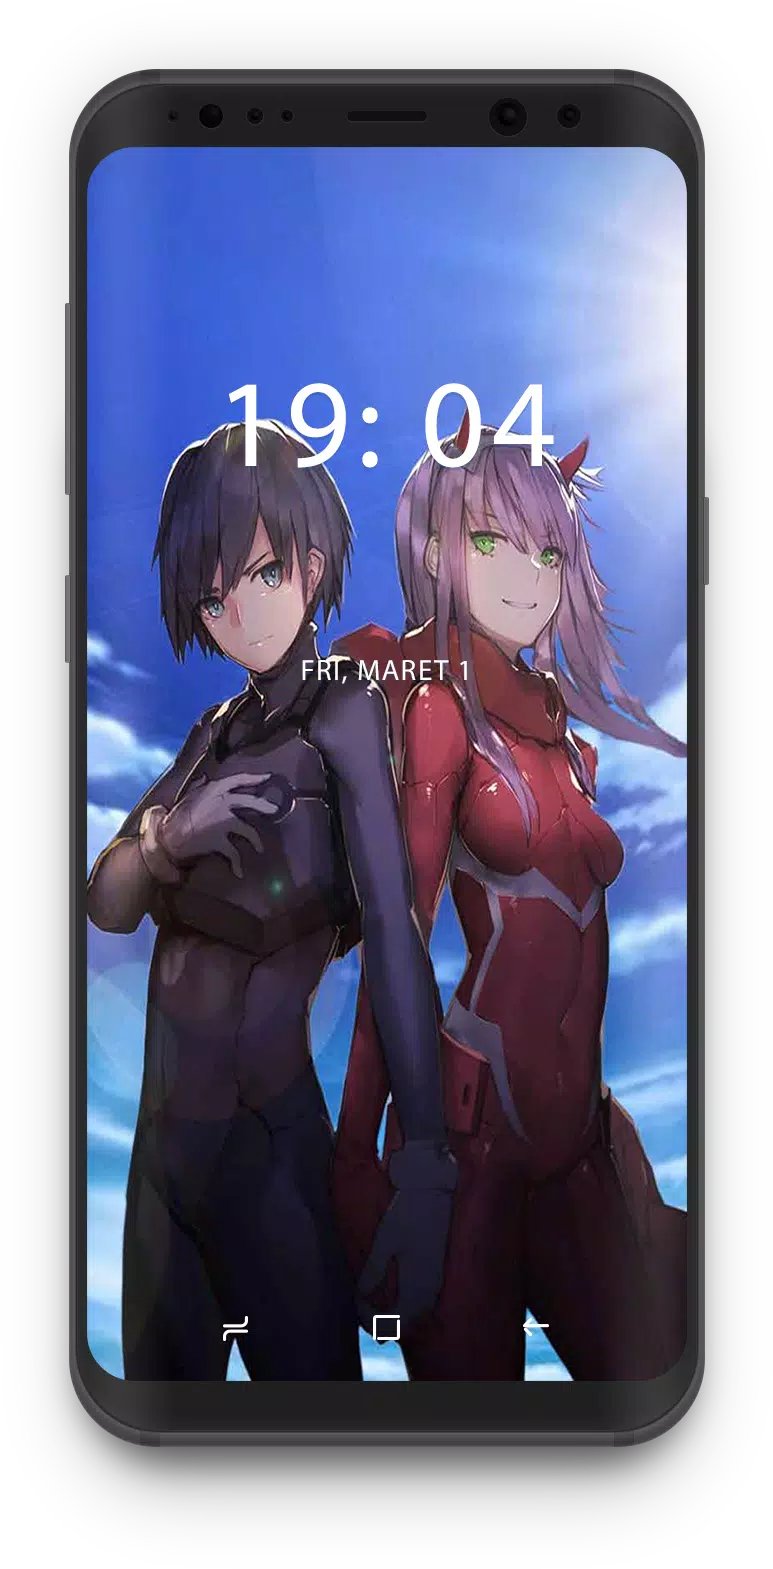 Zero Two Anime Wallpaper HD 4K APK for Android - Download